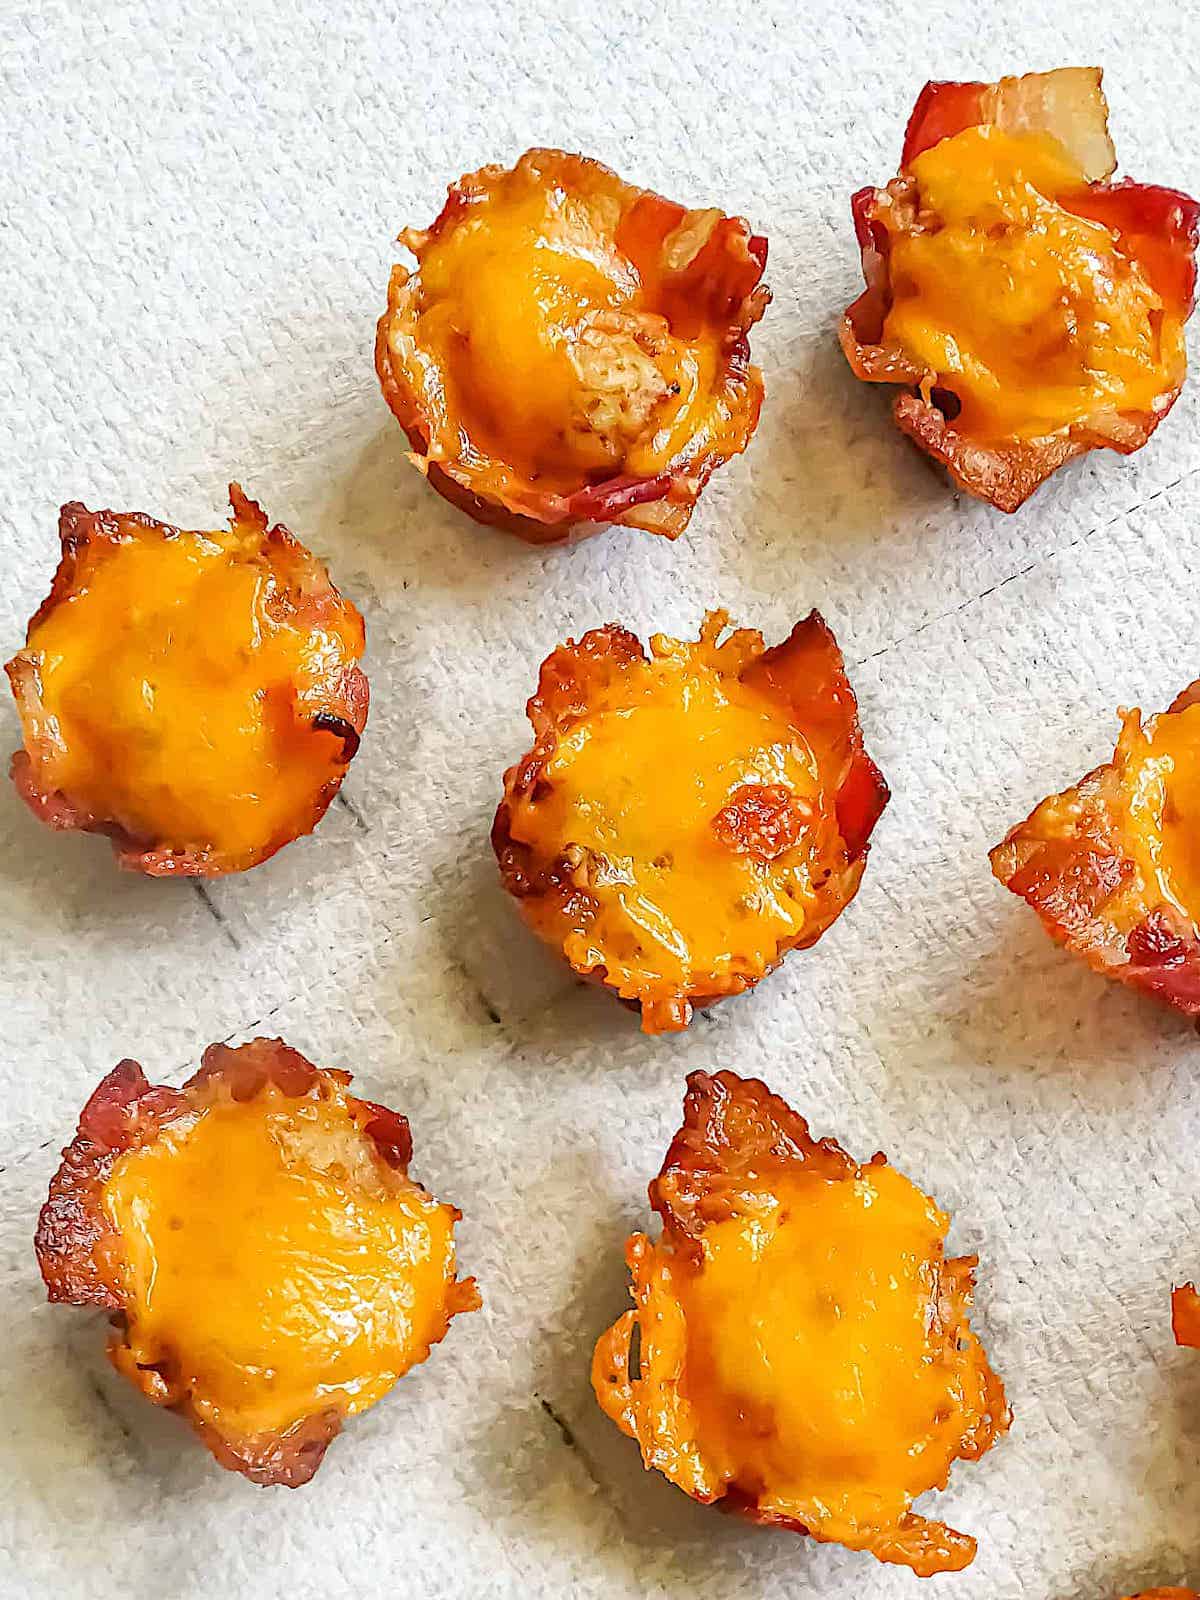 Bacon cups filled with tater tots and cheese on white background.